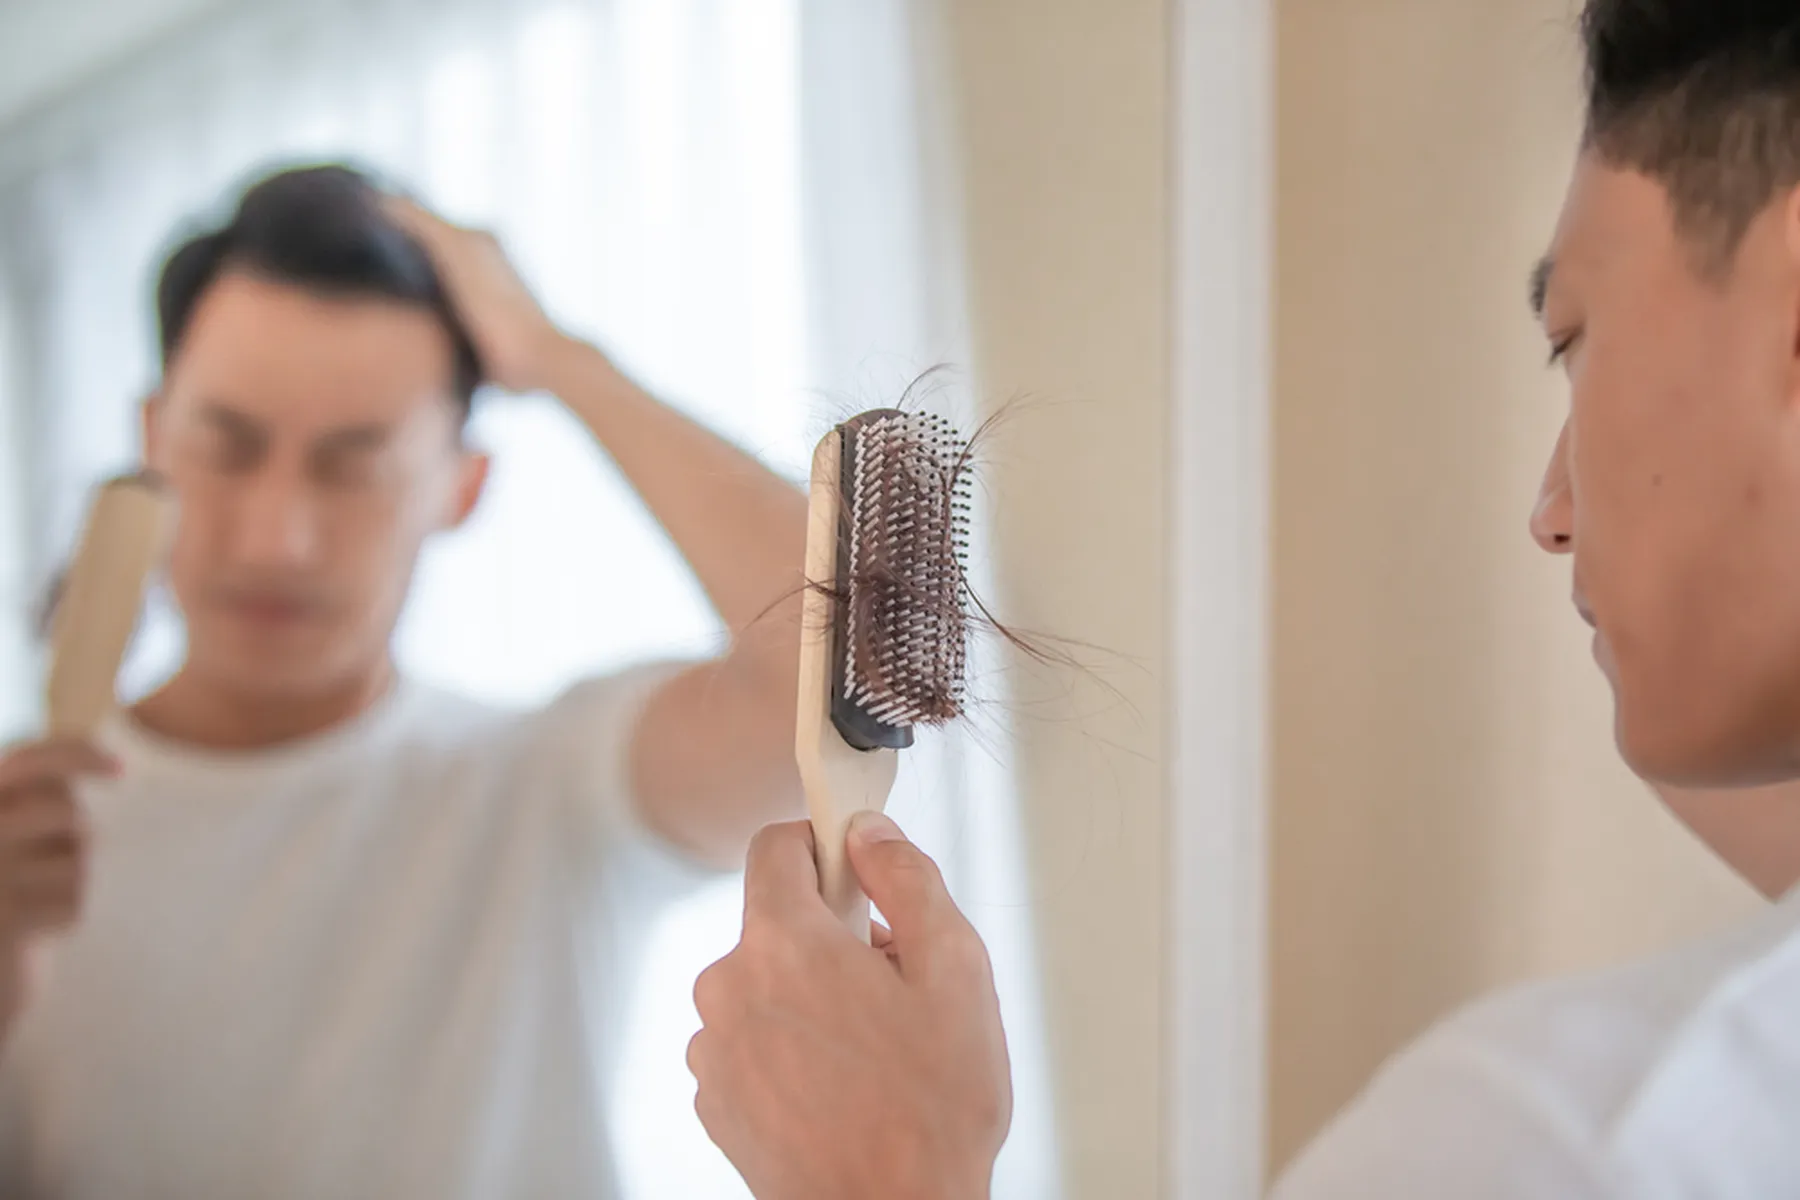 A man looks at a hairbrush with that has a lot of his hair in the bristles. The man's reflection can be seen in the mirror.